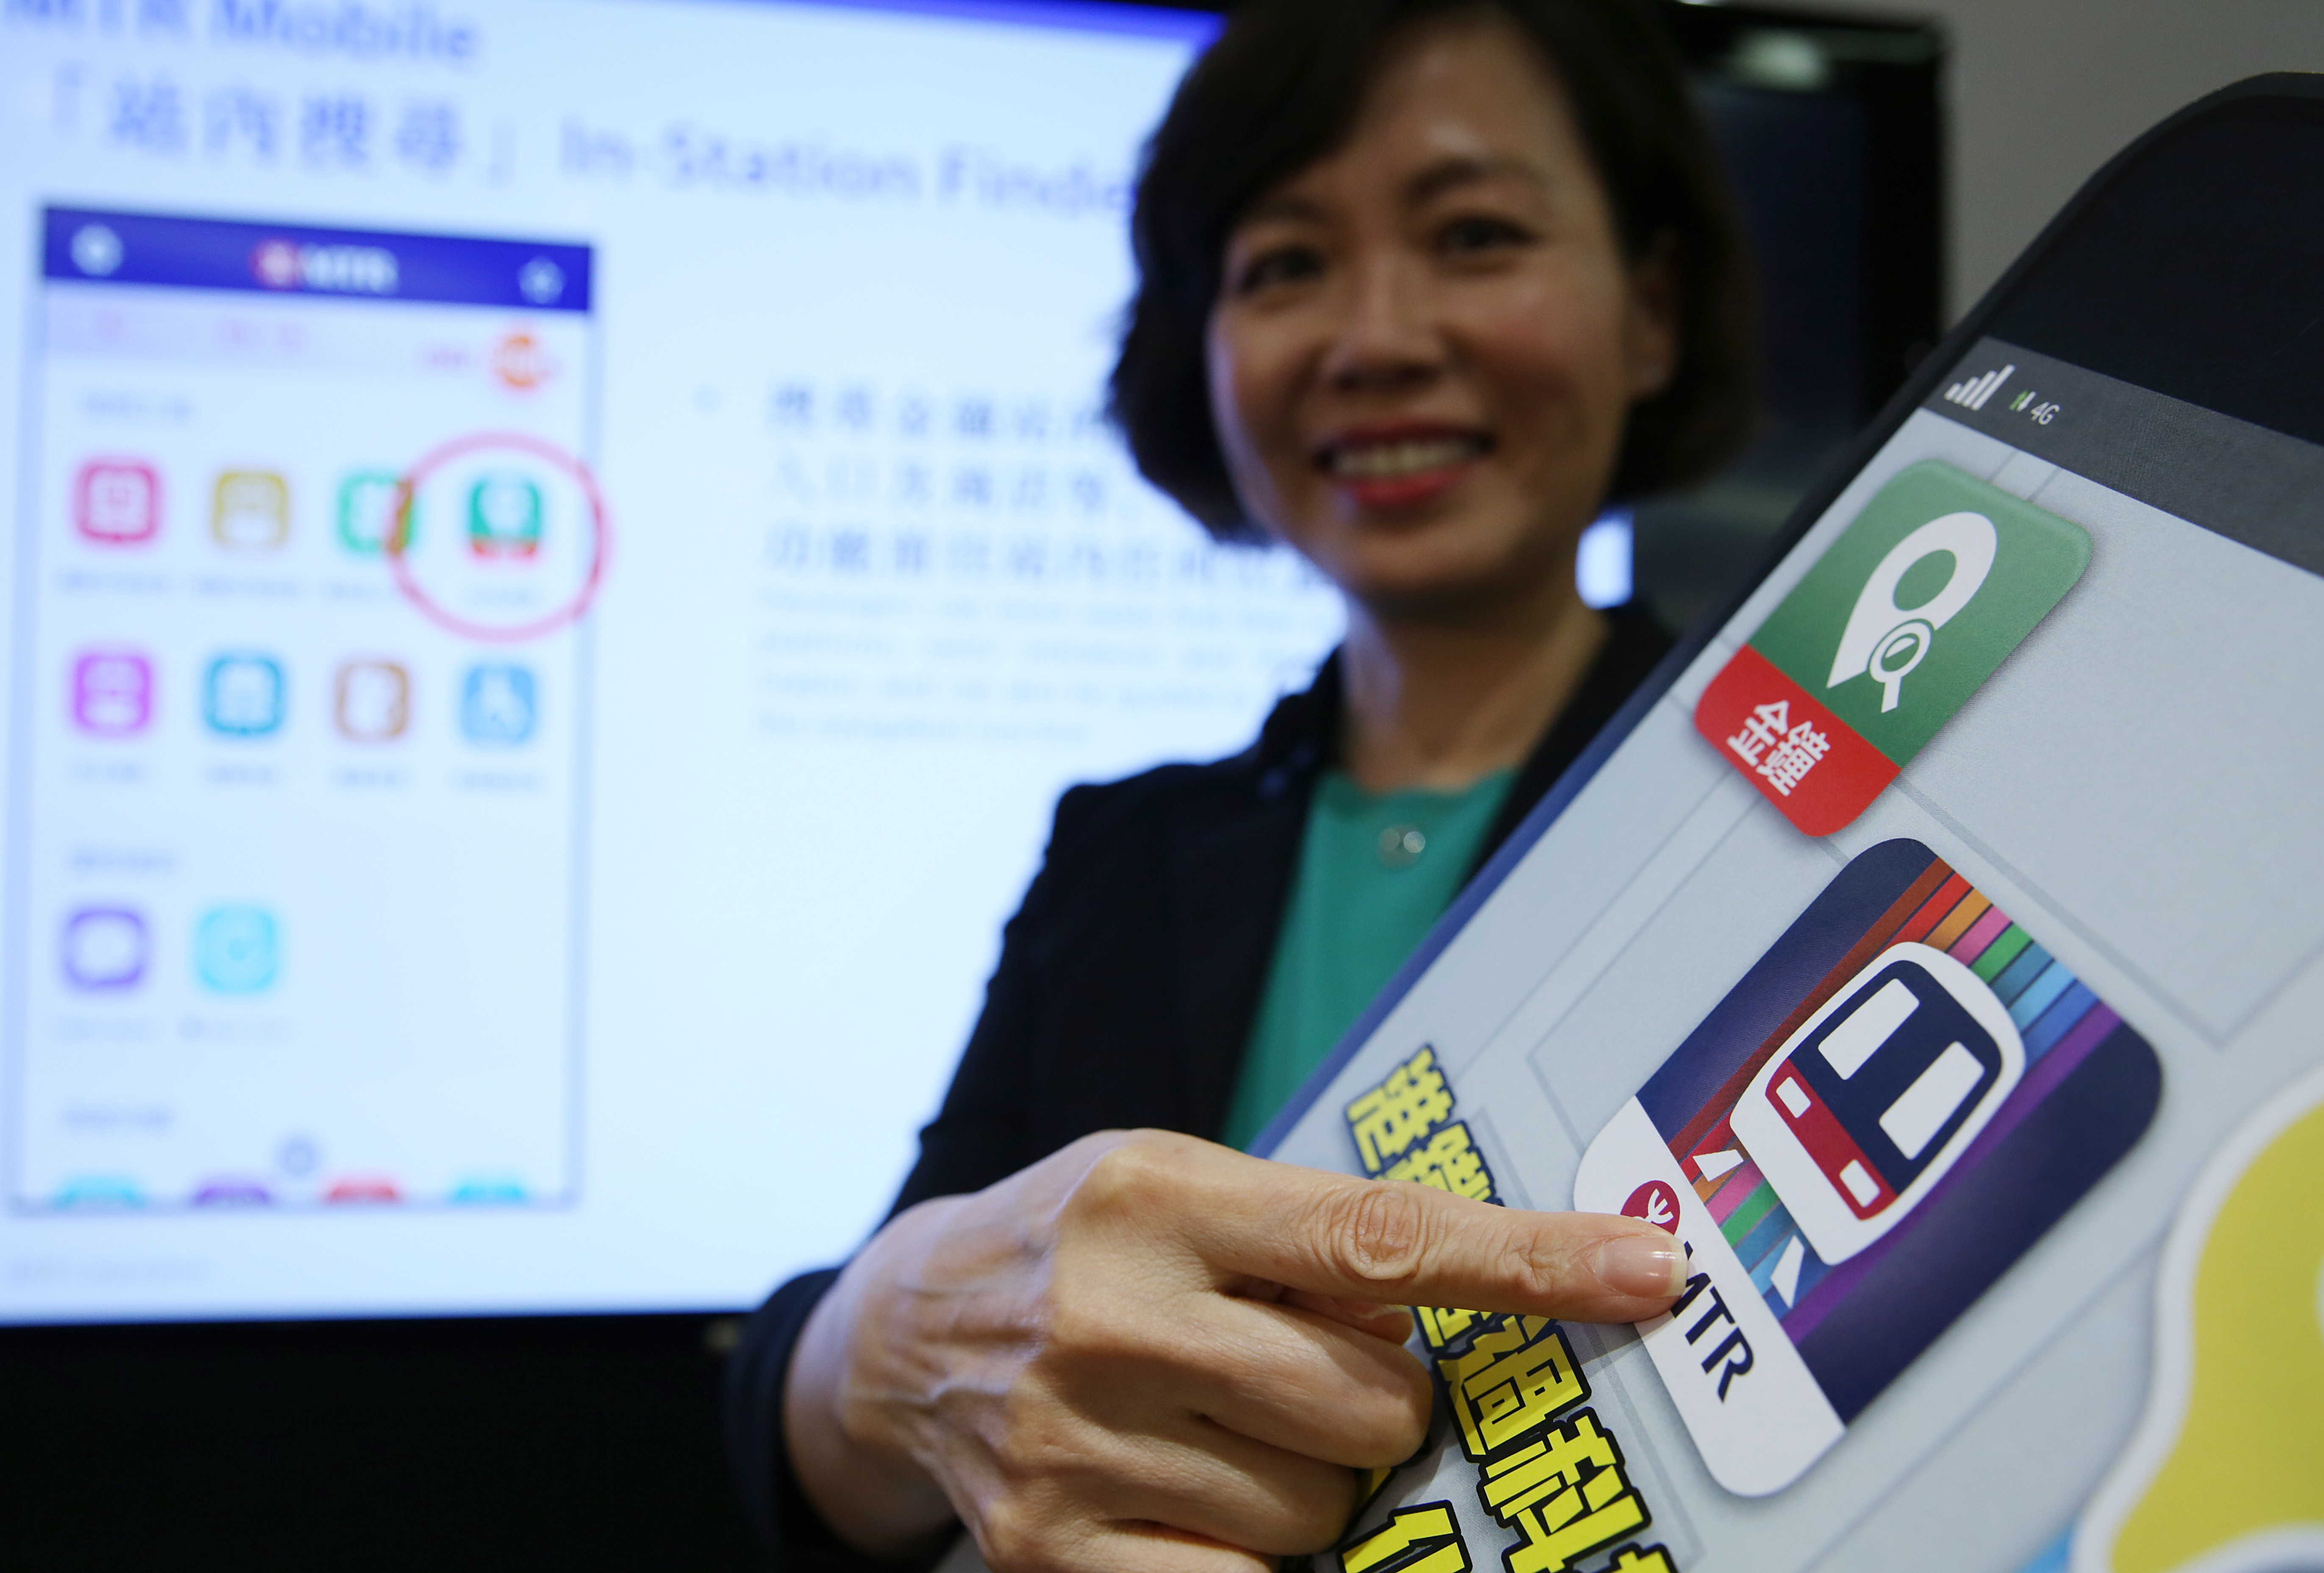 Jeny Yeung, commercial director of Hong Kong’s MTR Corporation, demonstrates the new MTR mobile app at a press conference in Kowloon Bay in August. Photo: Sam Tsang